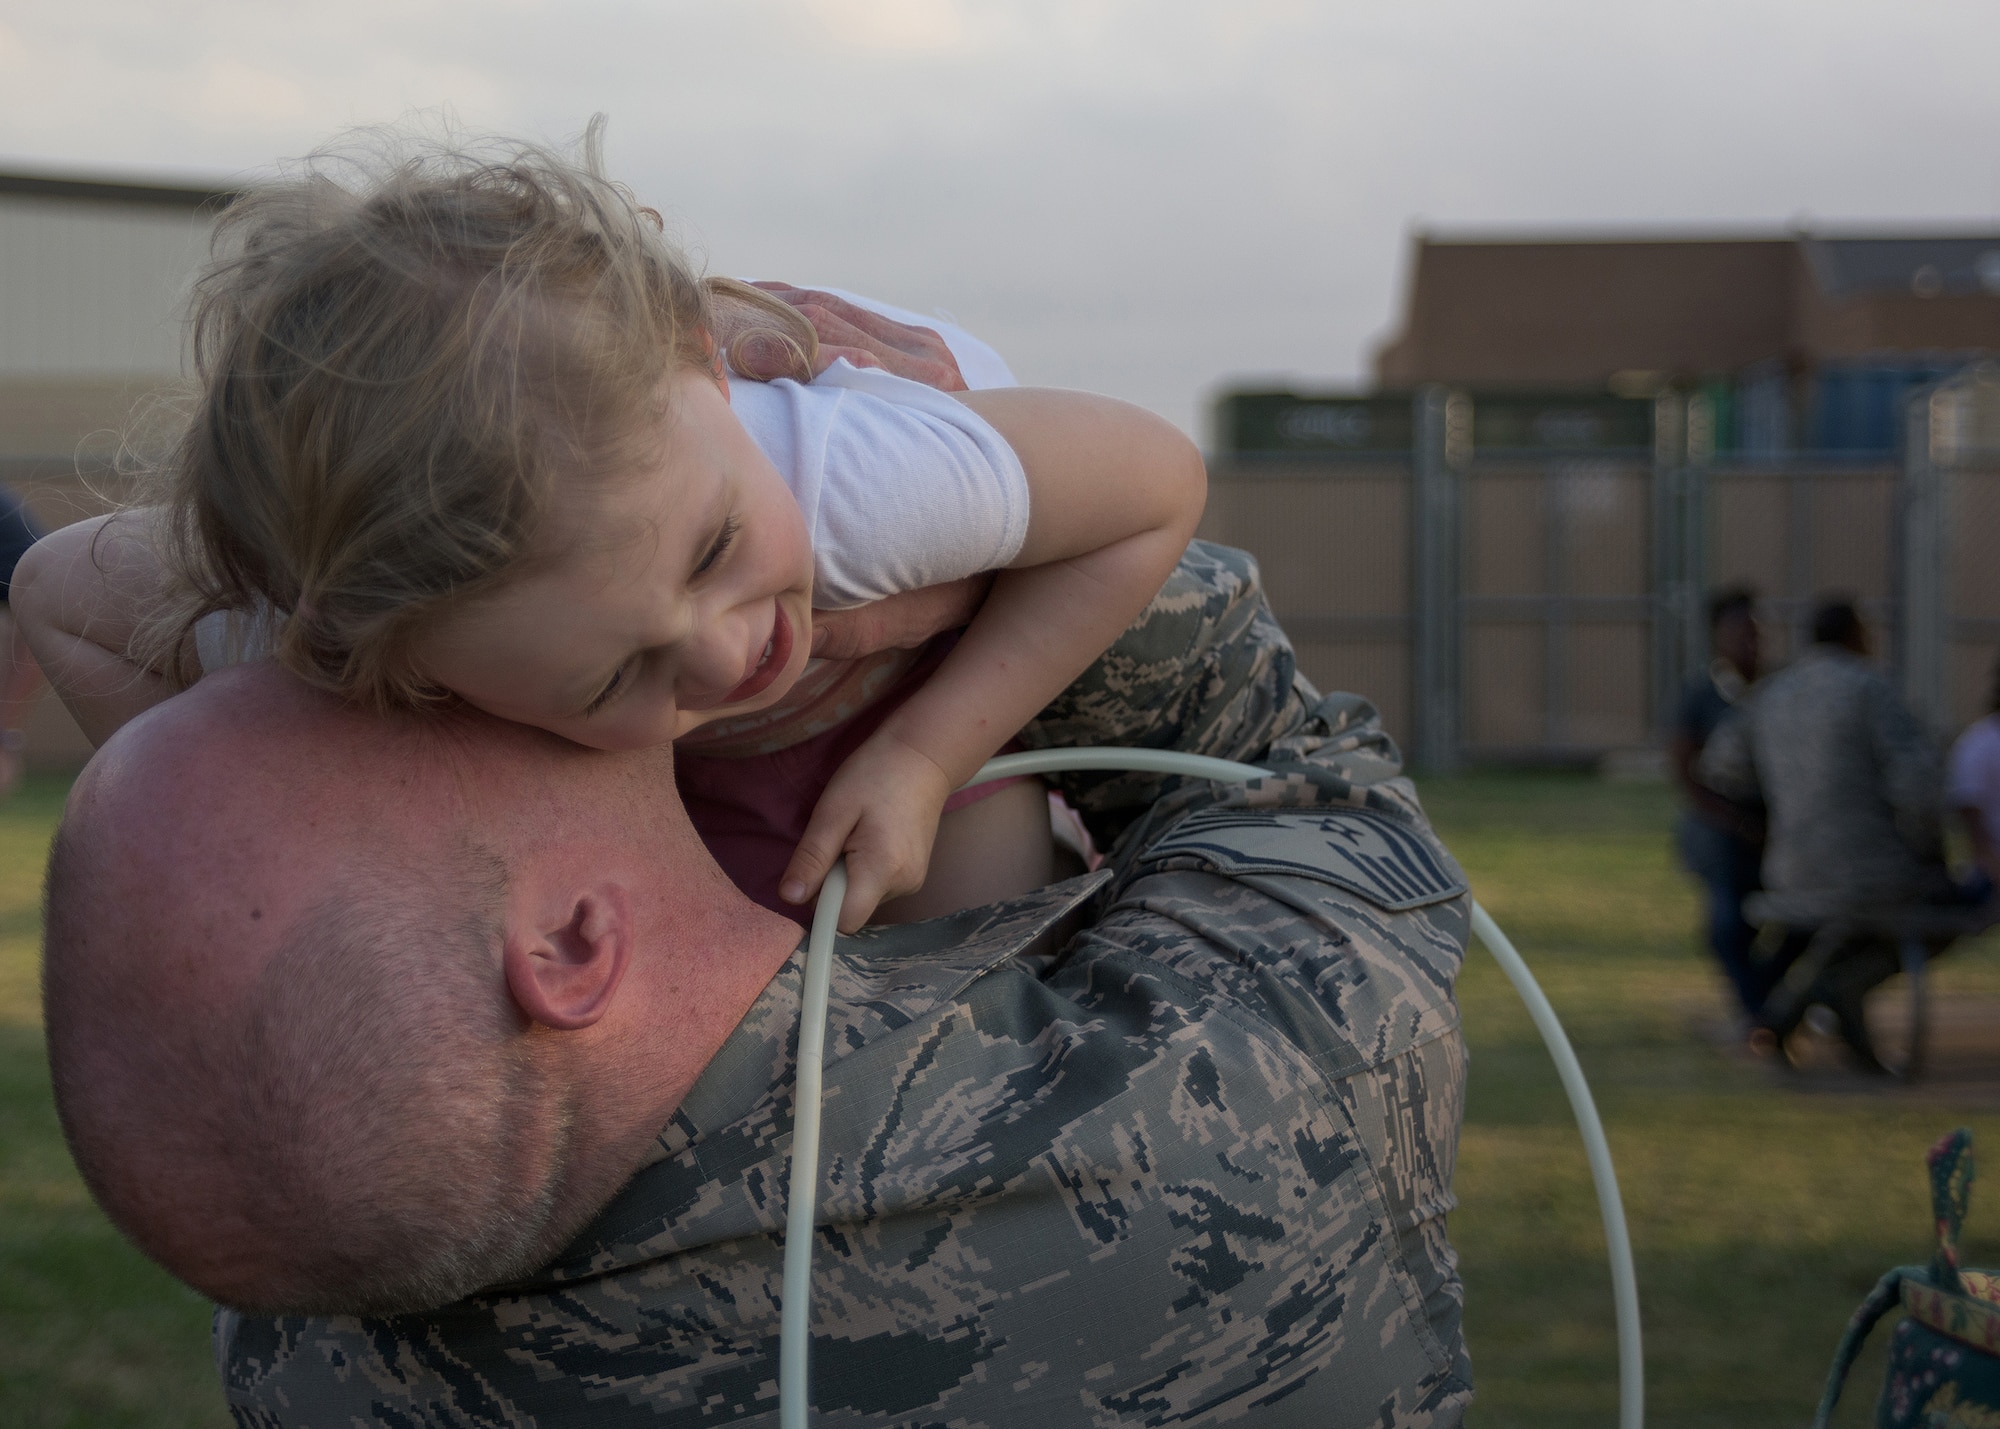 Air Force Master Sgt. Michael Rigsby assigned to the 137th Special Operations Civil Engineering Squadron, spends time with his daughter prior to deploying from Will Rogers Air National Guard Base, October 19, 2016. Rigsby is one of over 140 Airmen who will deploy from WRANGB in support of Operation Freedom's Sentinel in Southwest Asia, the first major deployment for the 137 SOW as a special operations wing. (U.S. Air National Guard photo by Tech. Sgt. Caroline Essex)